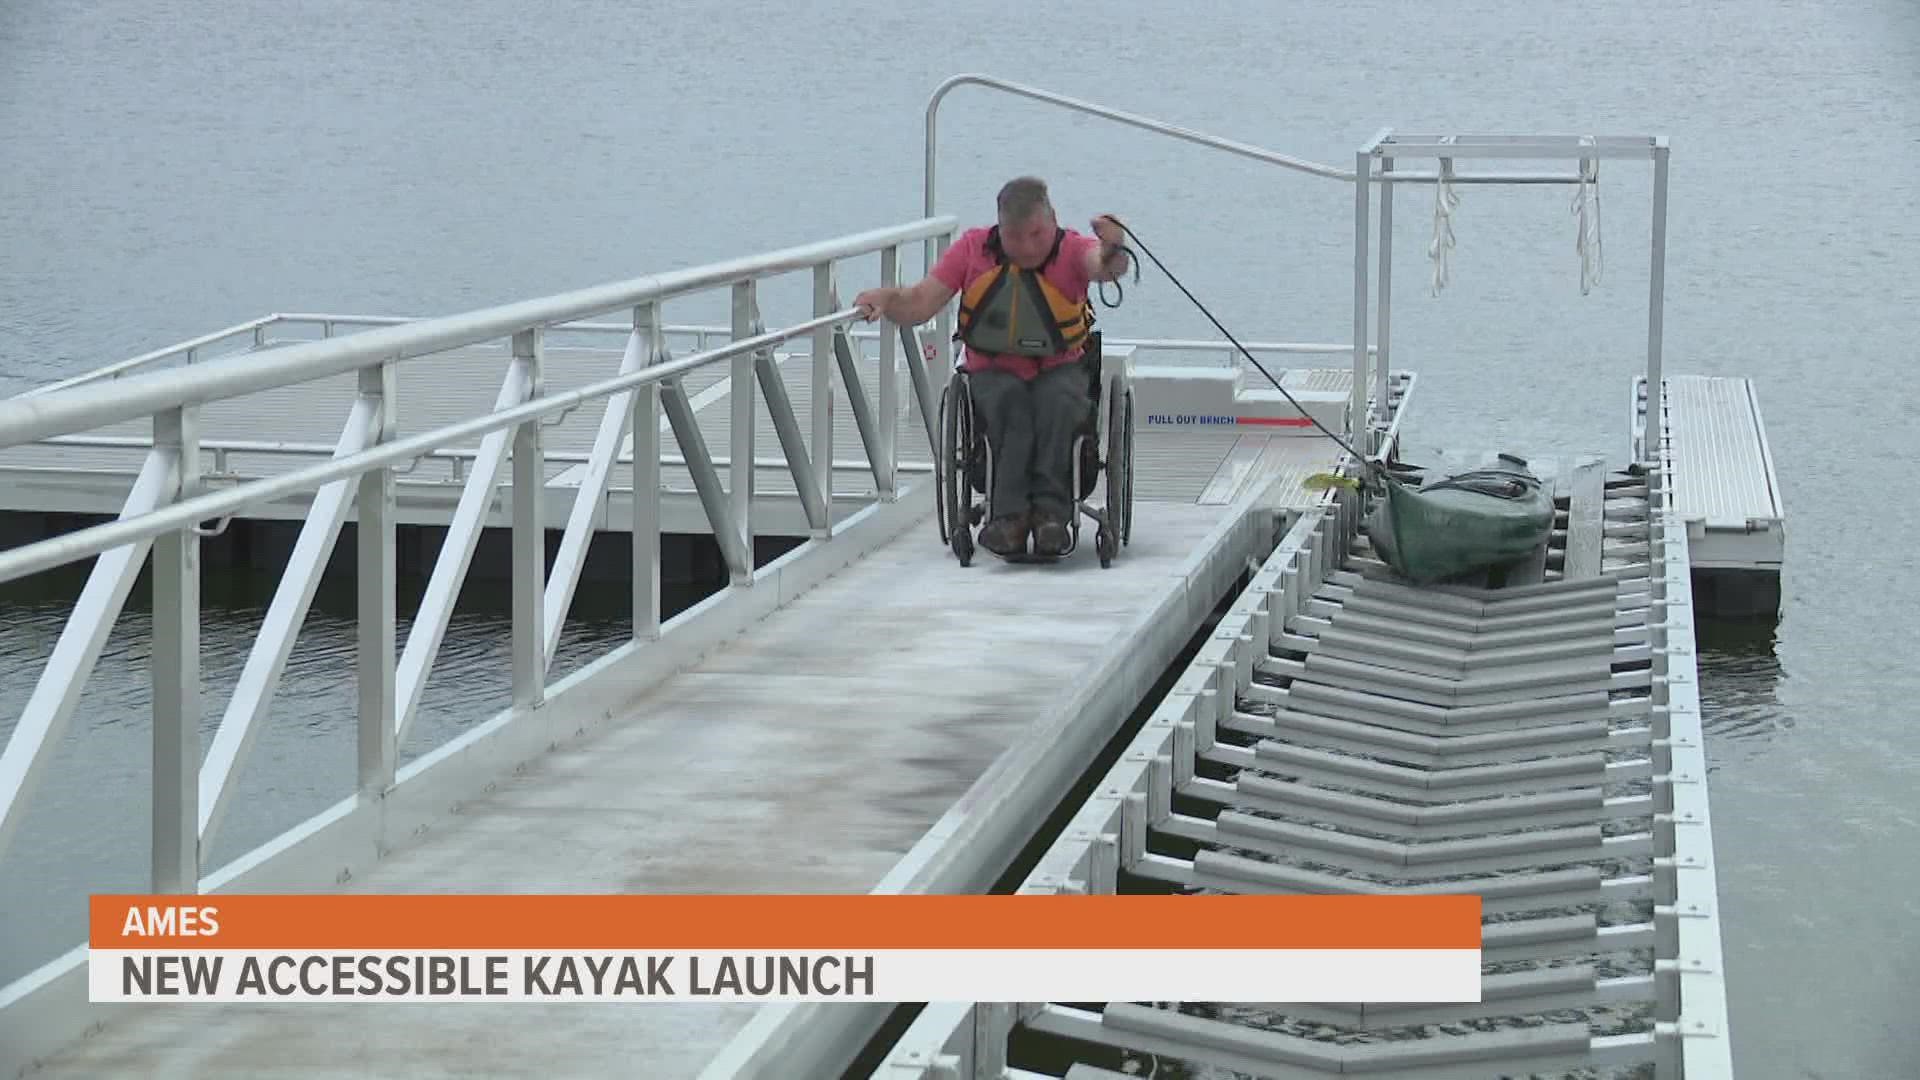 The launch allows adaptive paddlers, including those in wheelchairs, to transition into a canoe or kayak more easily.